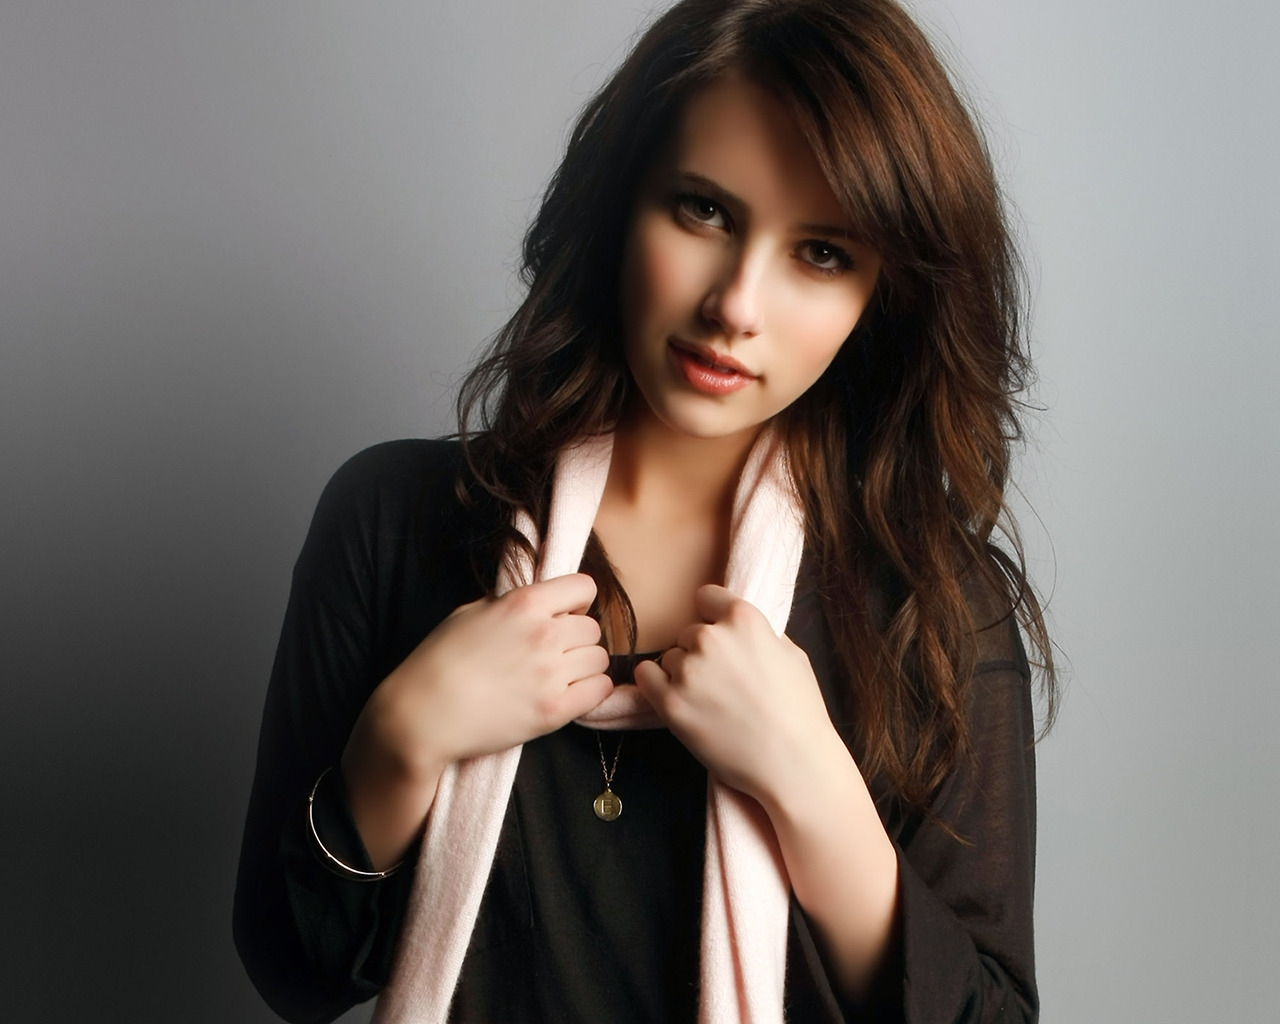 Cute Emma Roberts for 1280 x 1024 resolution